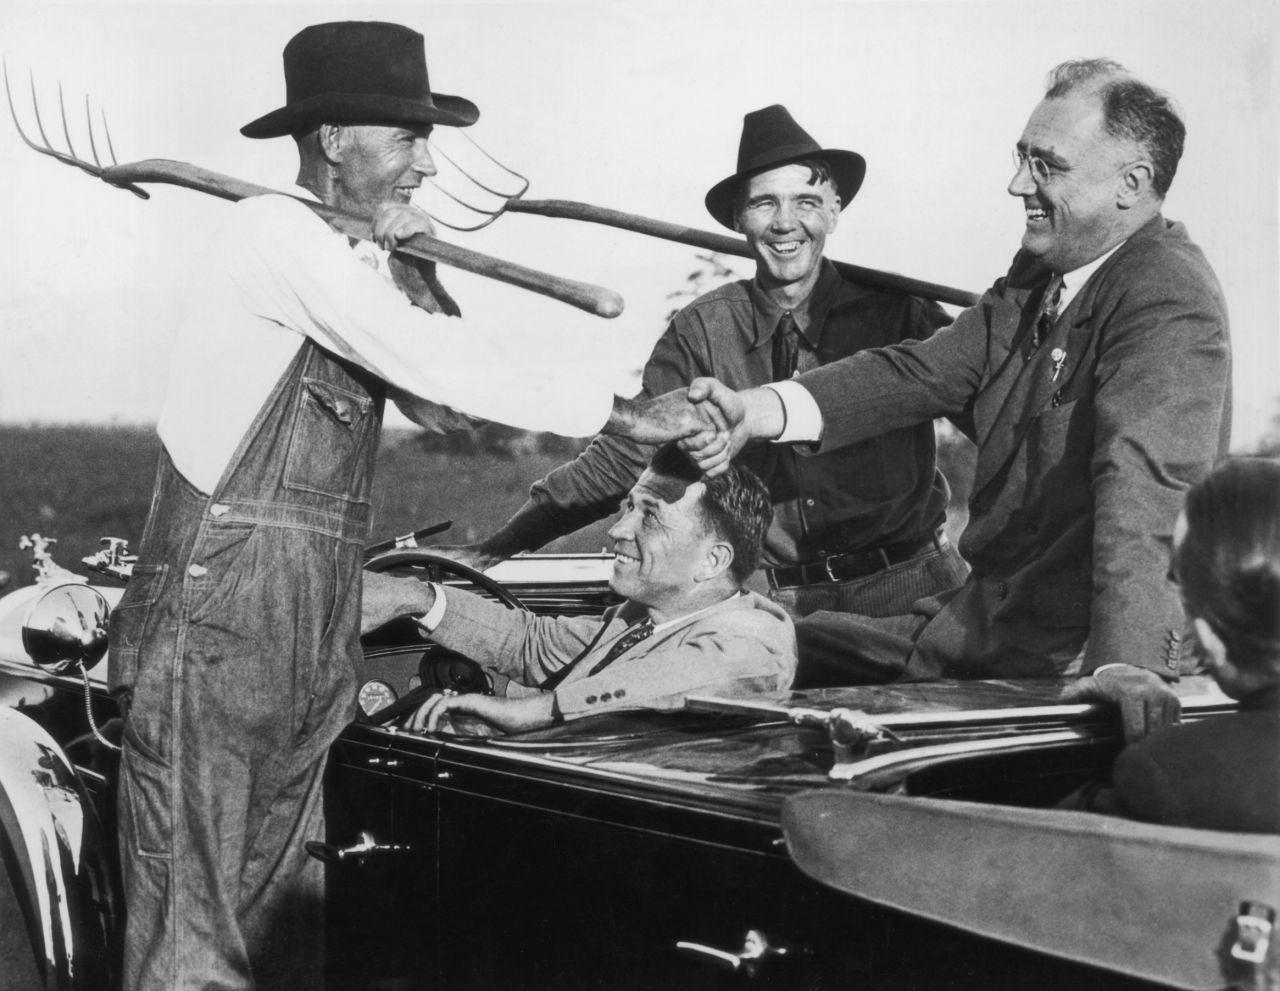 Roosevelt chats to two Georgia farmers in 1932, the first year he was elected president. During his first campaign for the presidency, he used the slogan, "Happy days are here again."